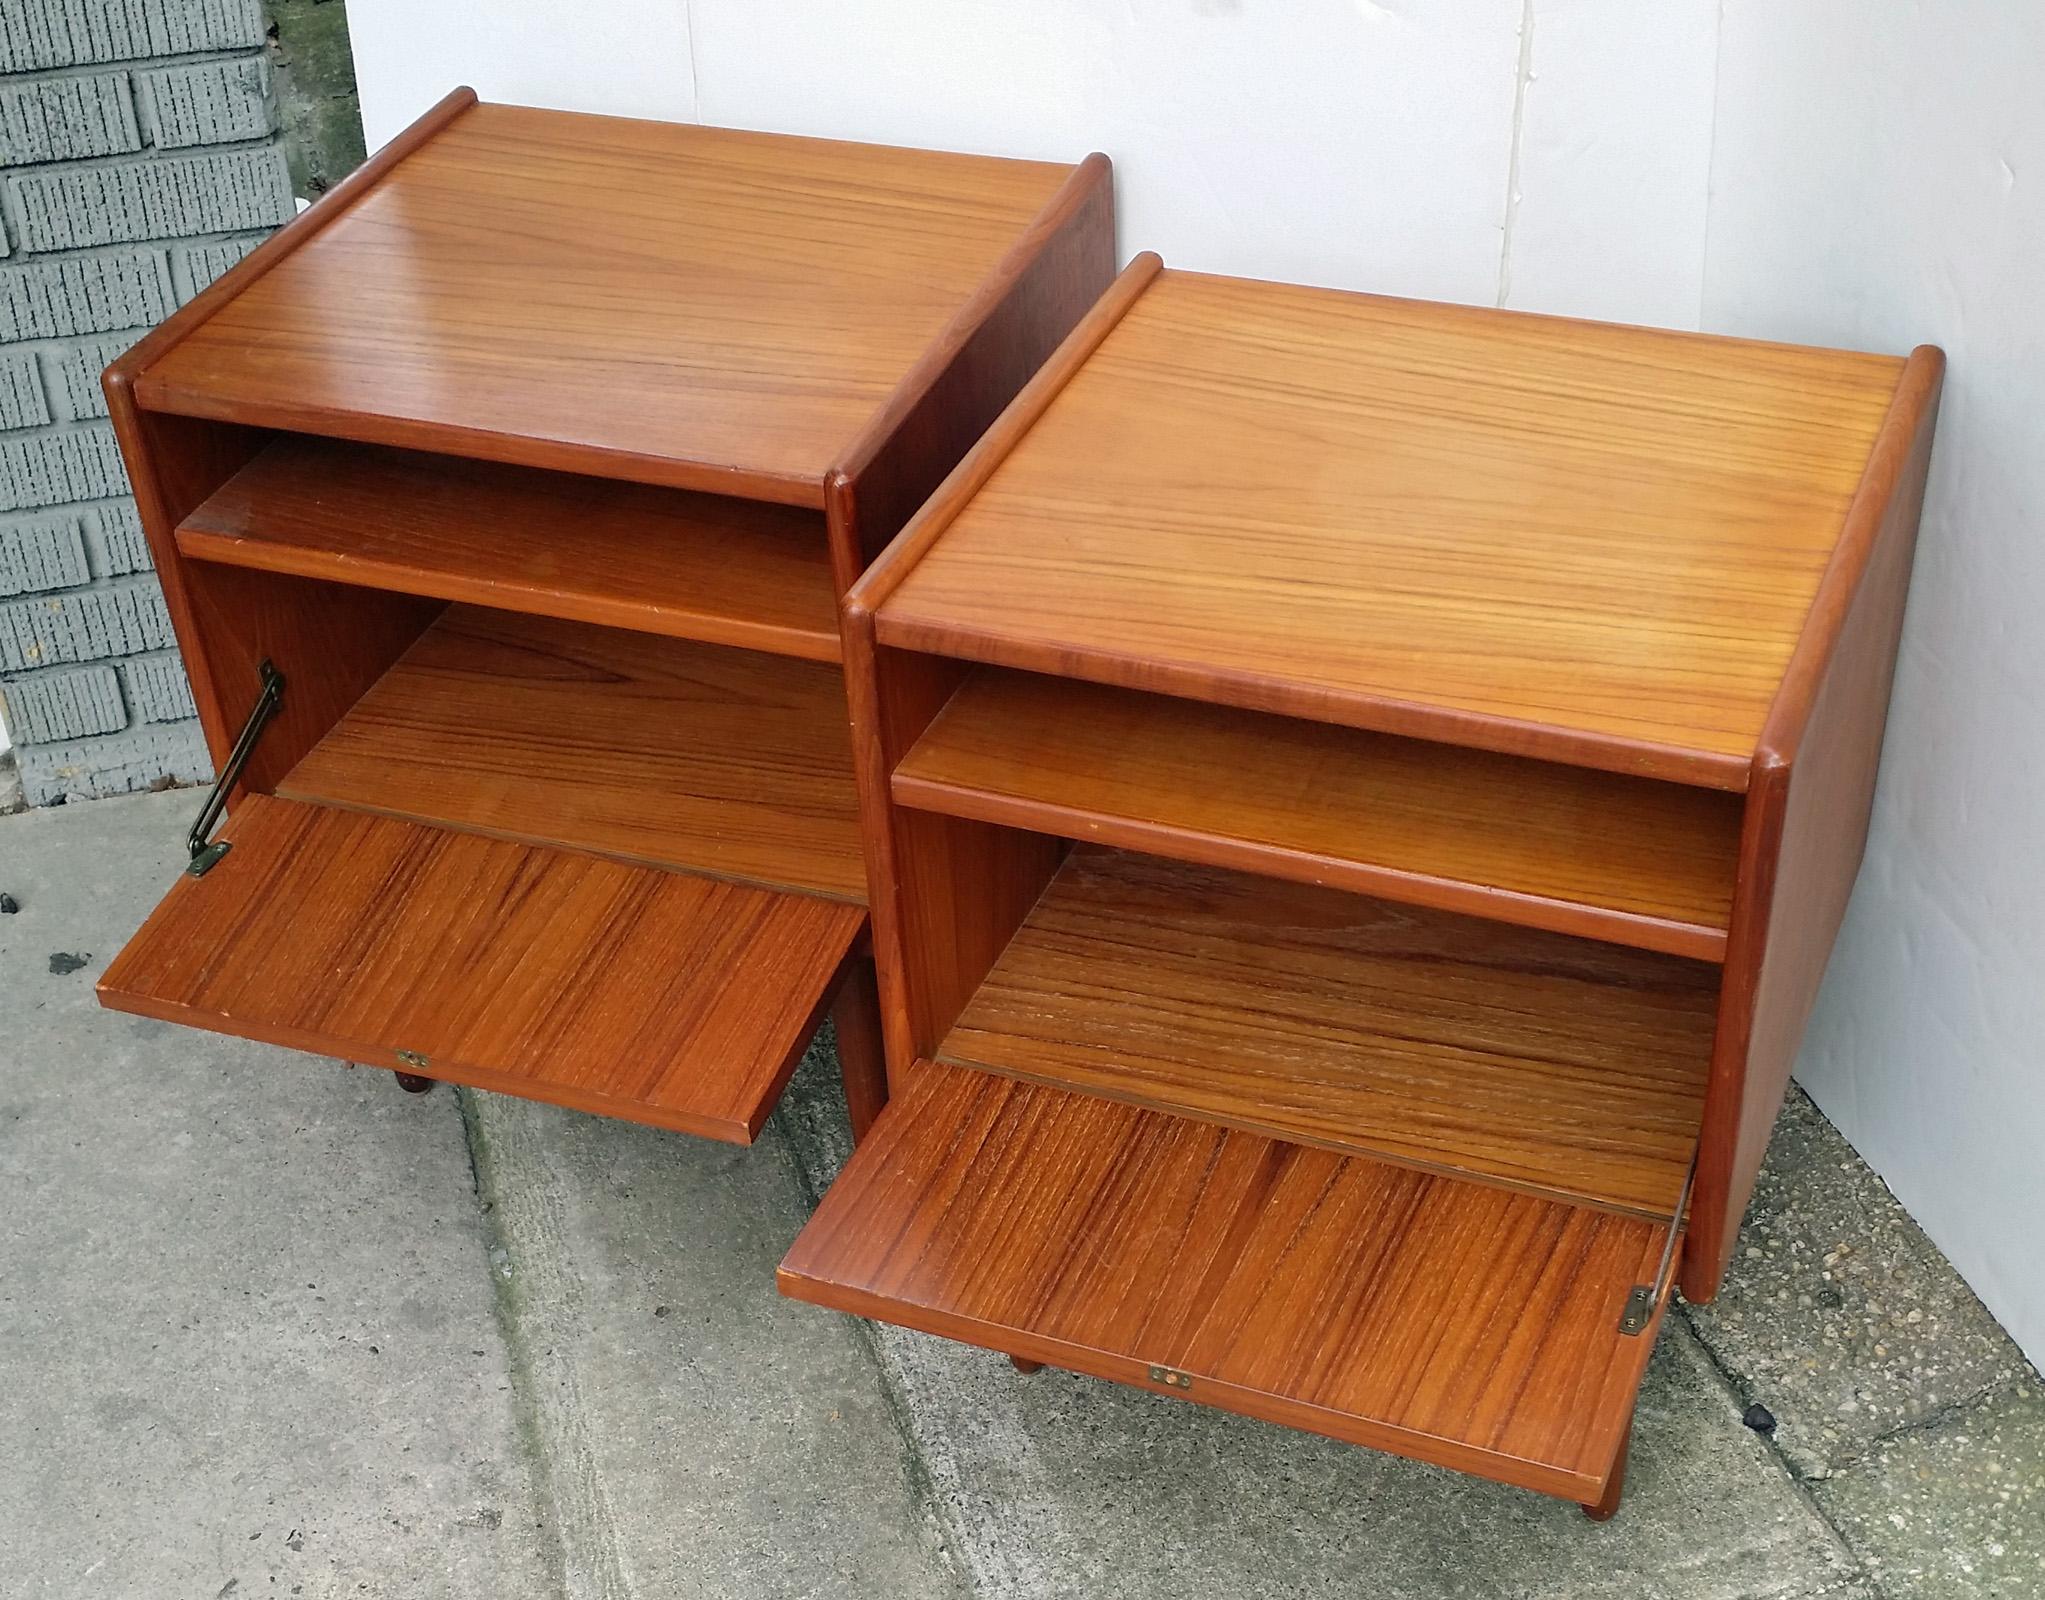 Pair of vintage nightstands in fine original condition. Also suitable as end tables. Nicely grained teakwood construction.
Design by Svend Madsen for Falster, Denmark.